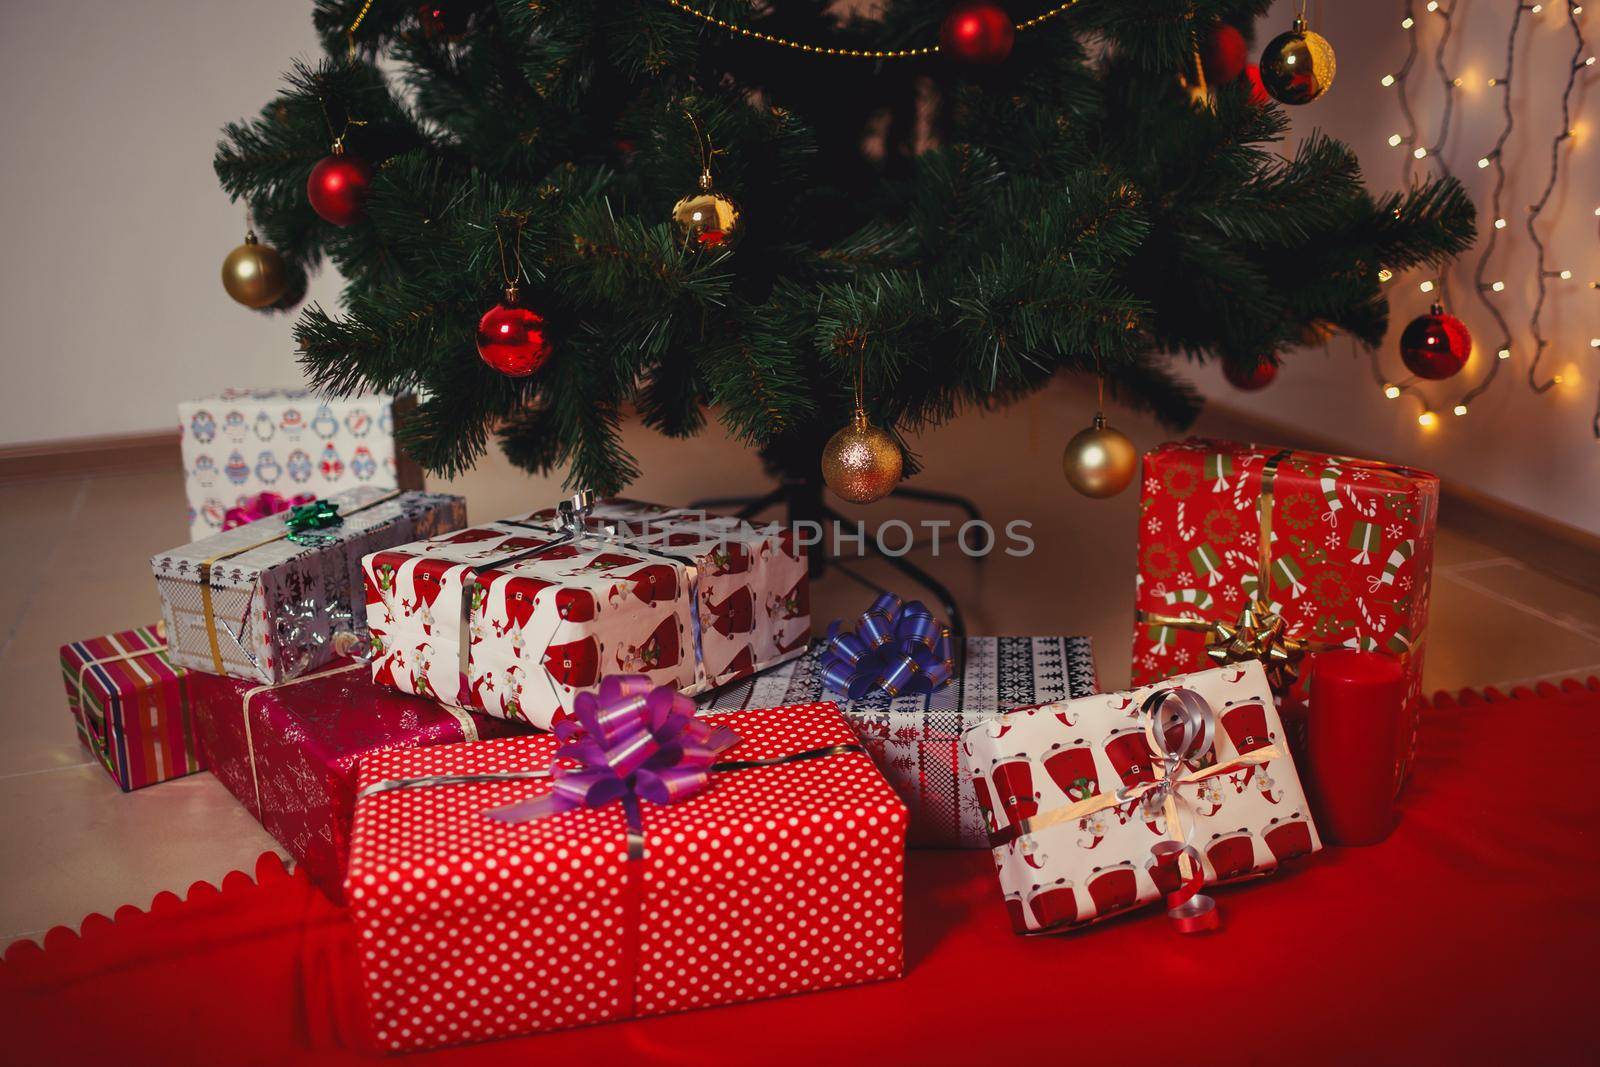 Christmas tree with Christmas toys. Gifts lying under the tree